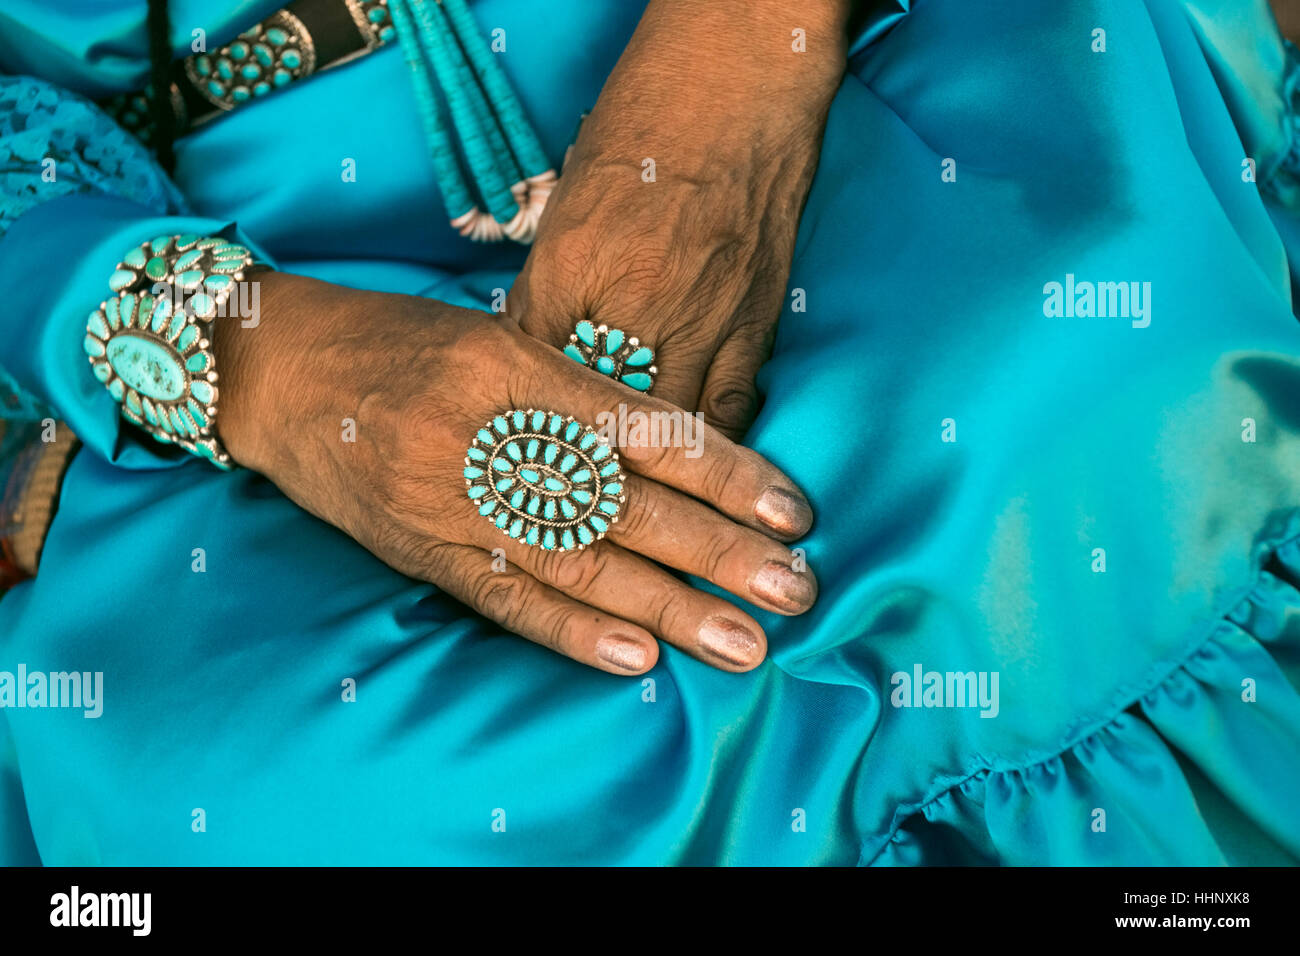 Lap of woman wearing traditional blue dress and rings Stock Photo